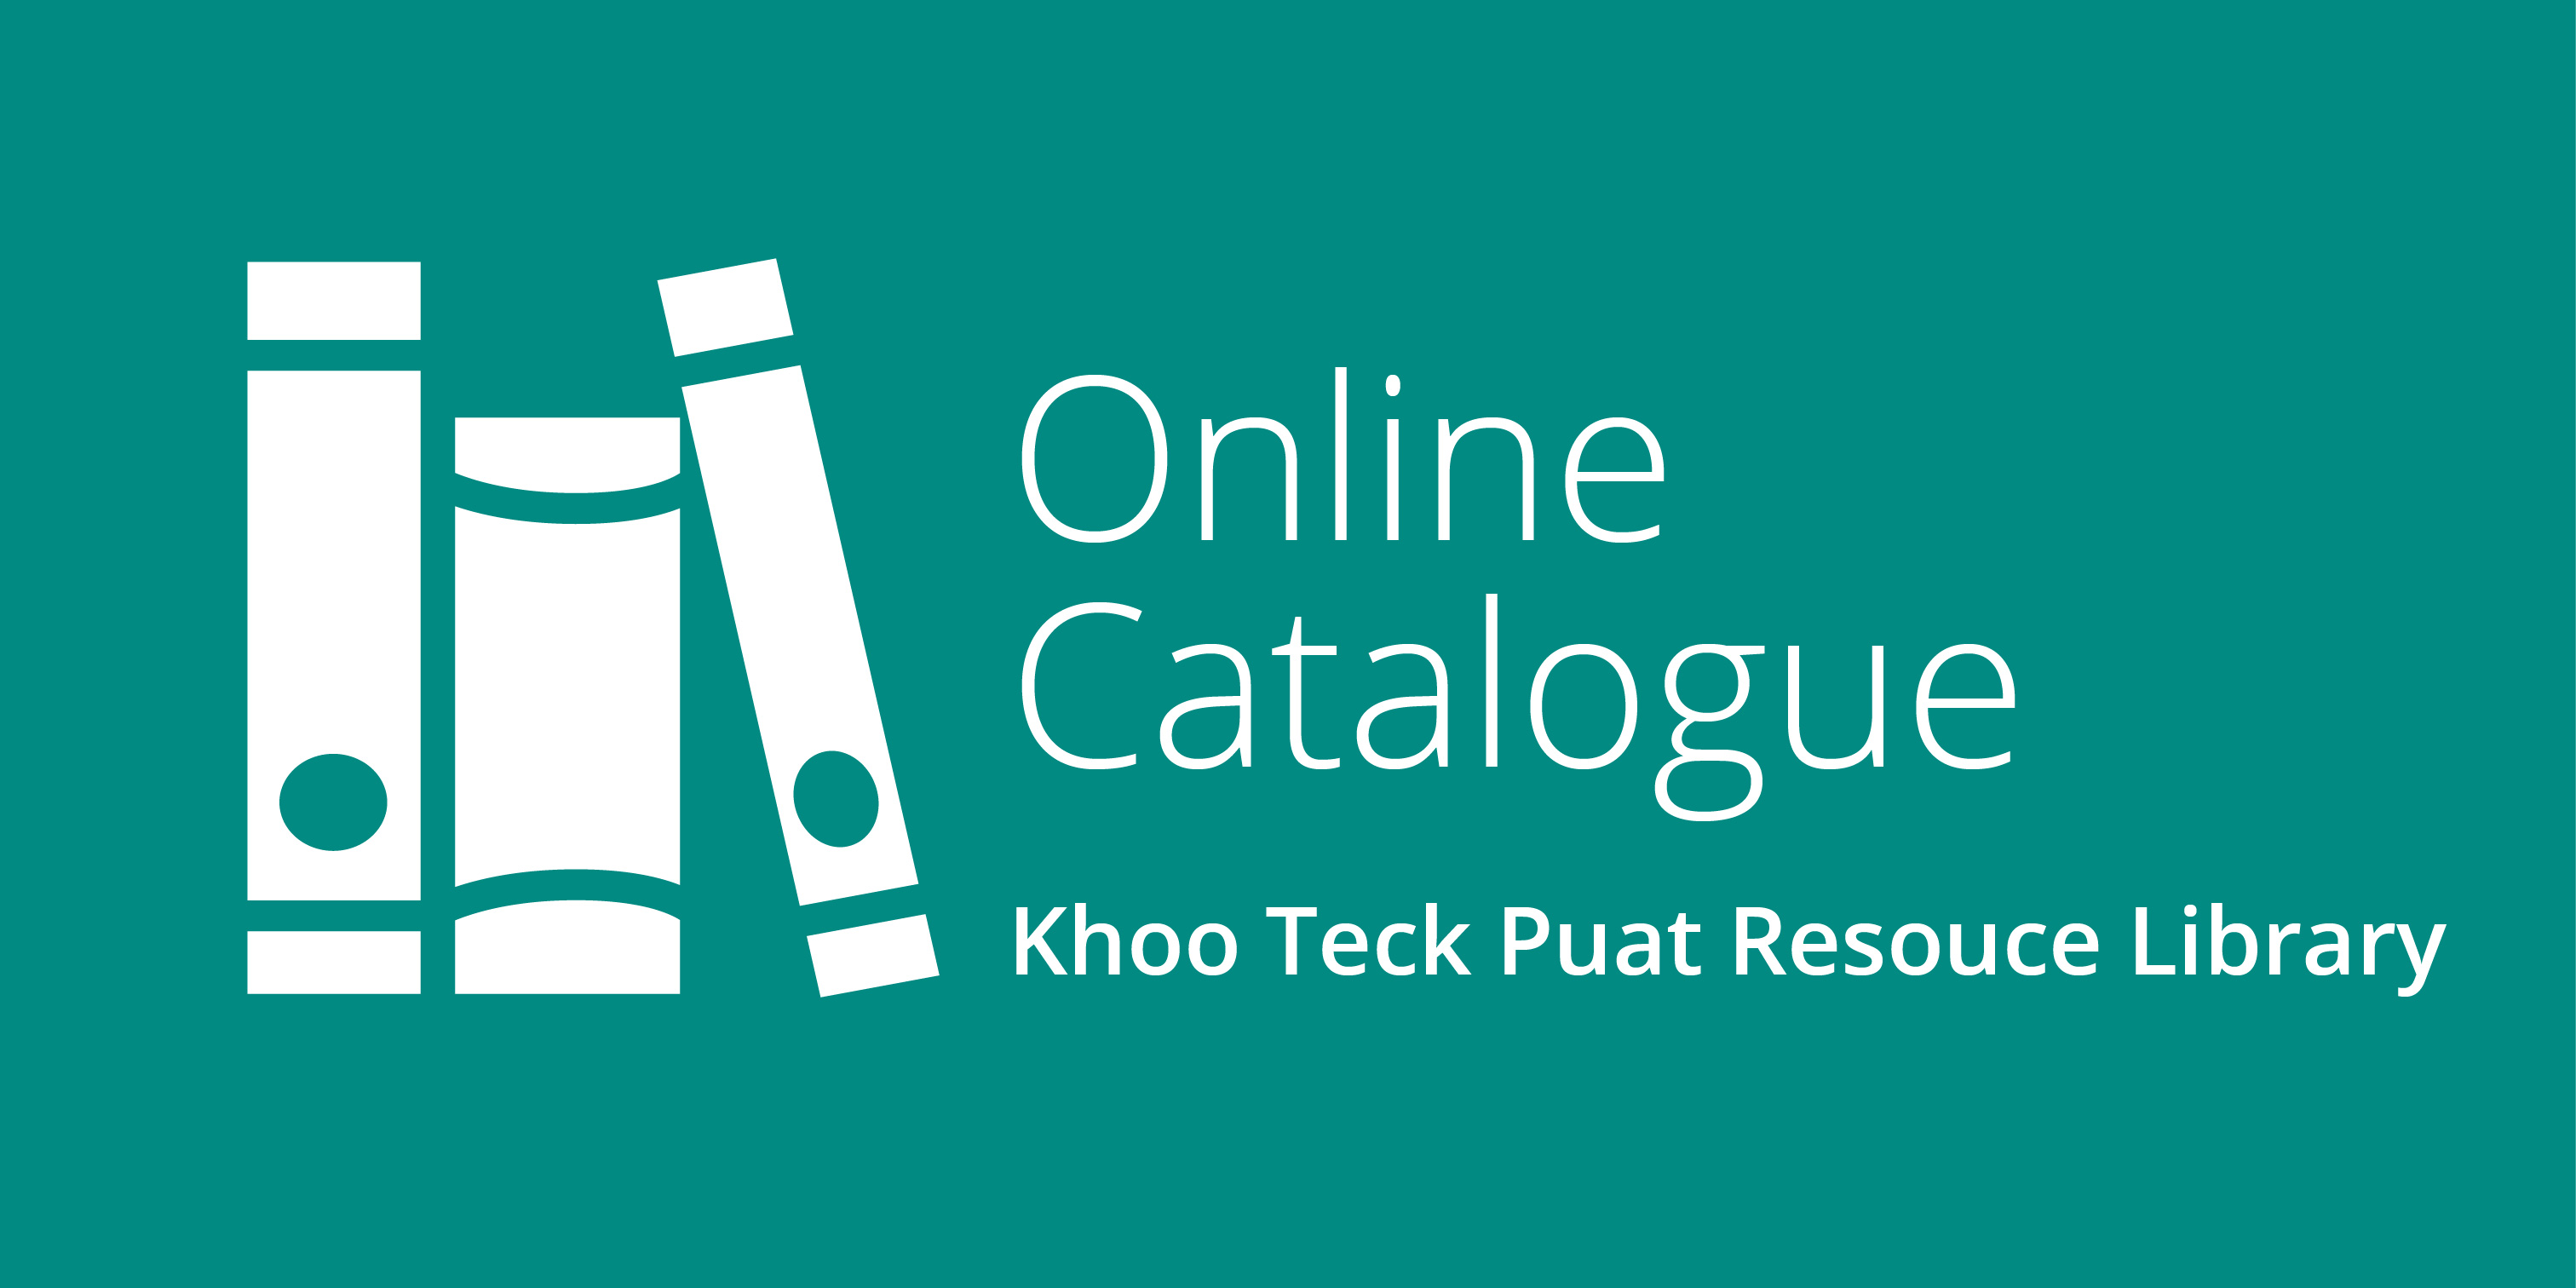 Online Library Catalogue